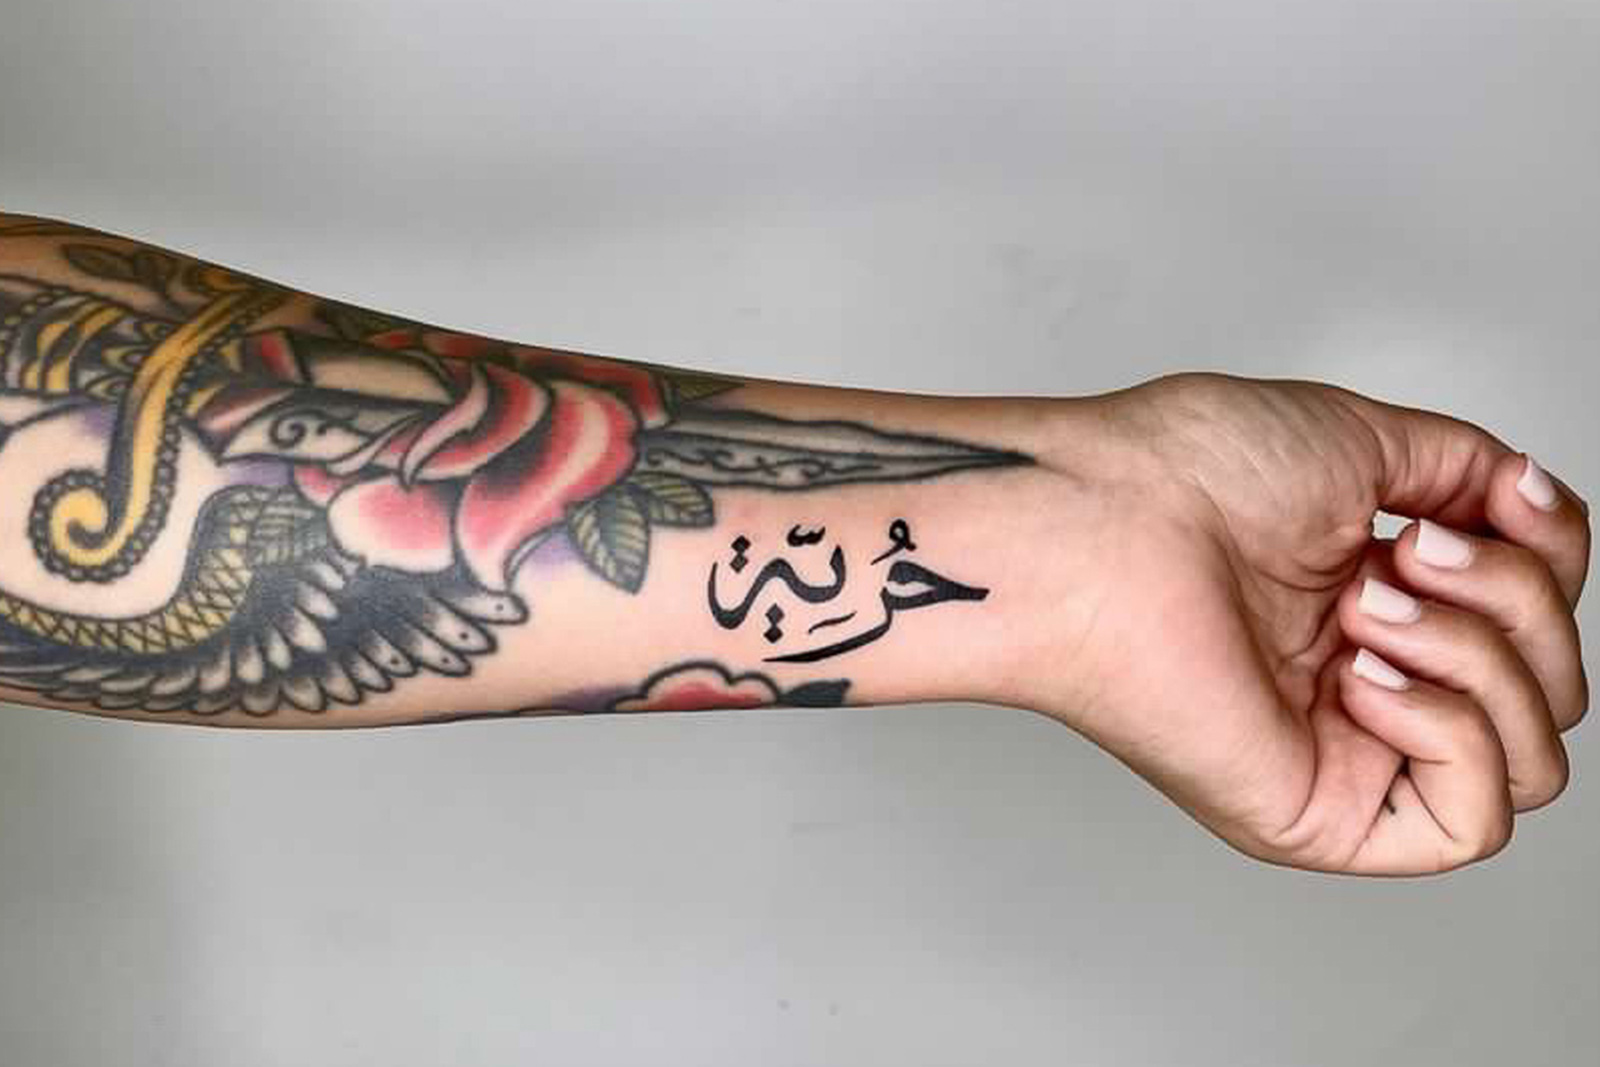 20+ Meaningful Arabic Tattoo Ideas For Guys And Girls